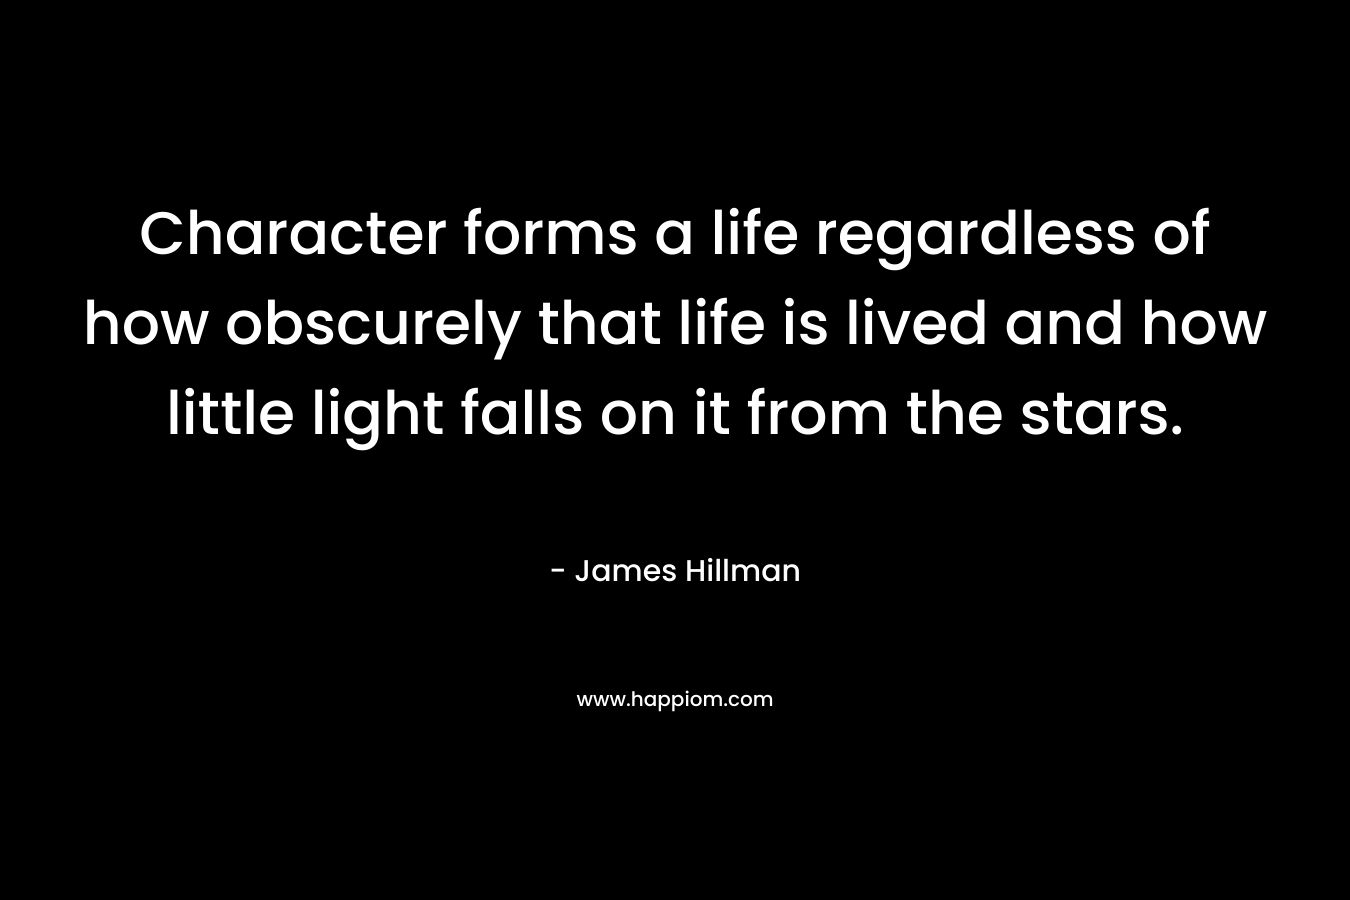 Character forms a life regardless of how obscurely that life is lived and how little light falls on it from the stars.